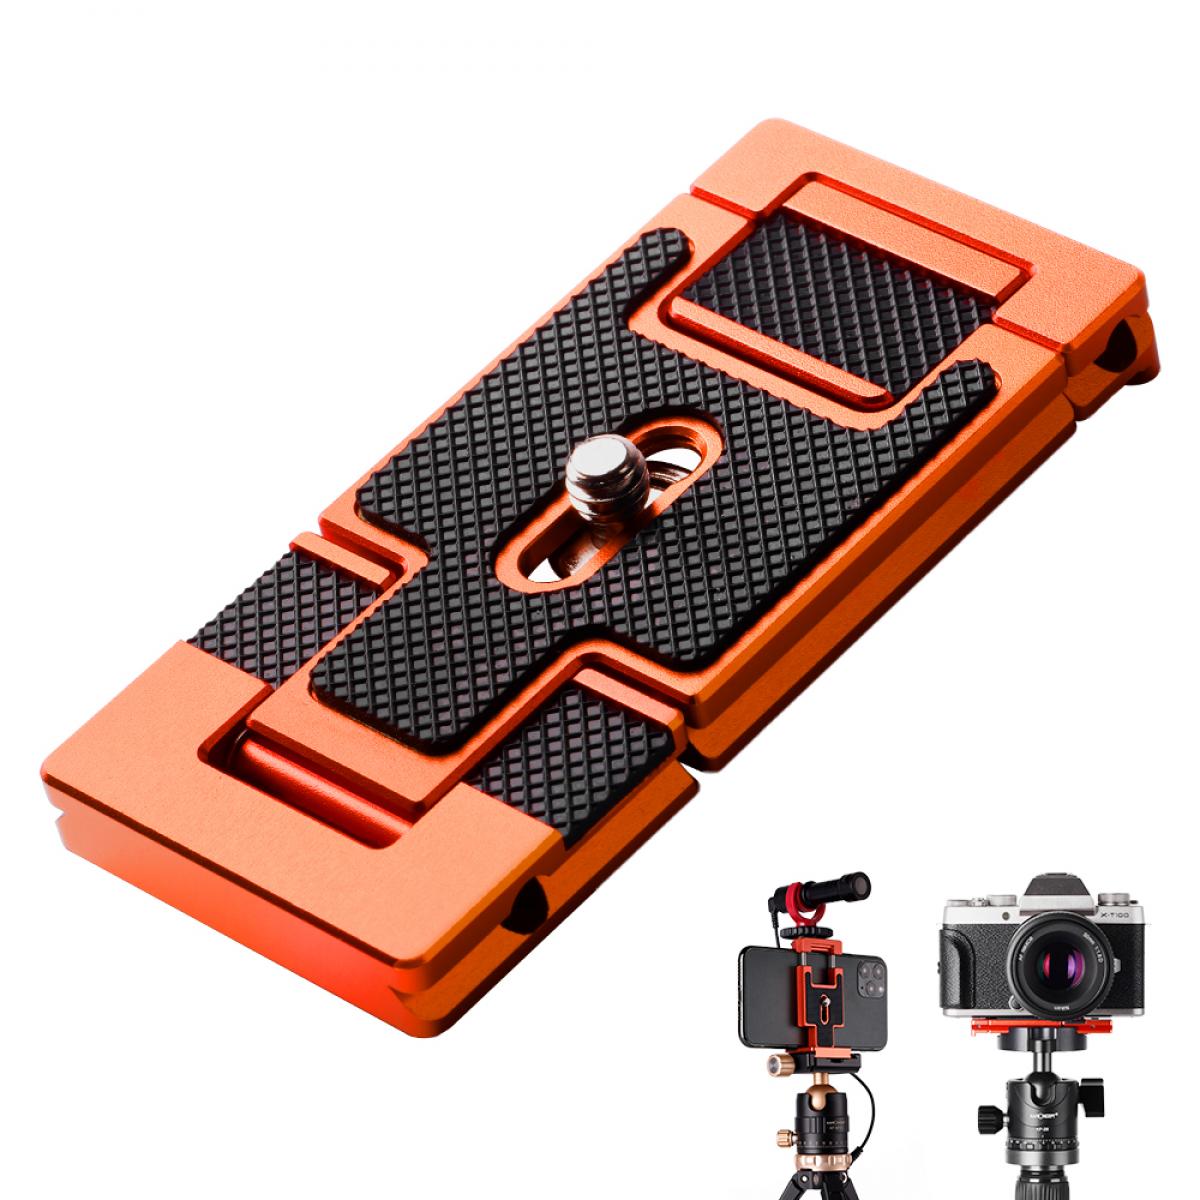 K&F Concept Arca Swiss Quick Release Plate for Cameras and Smartphones - Orange